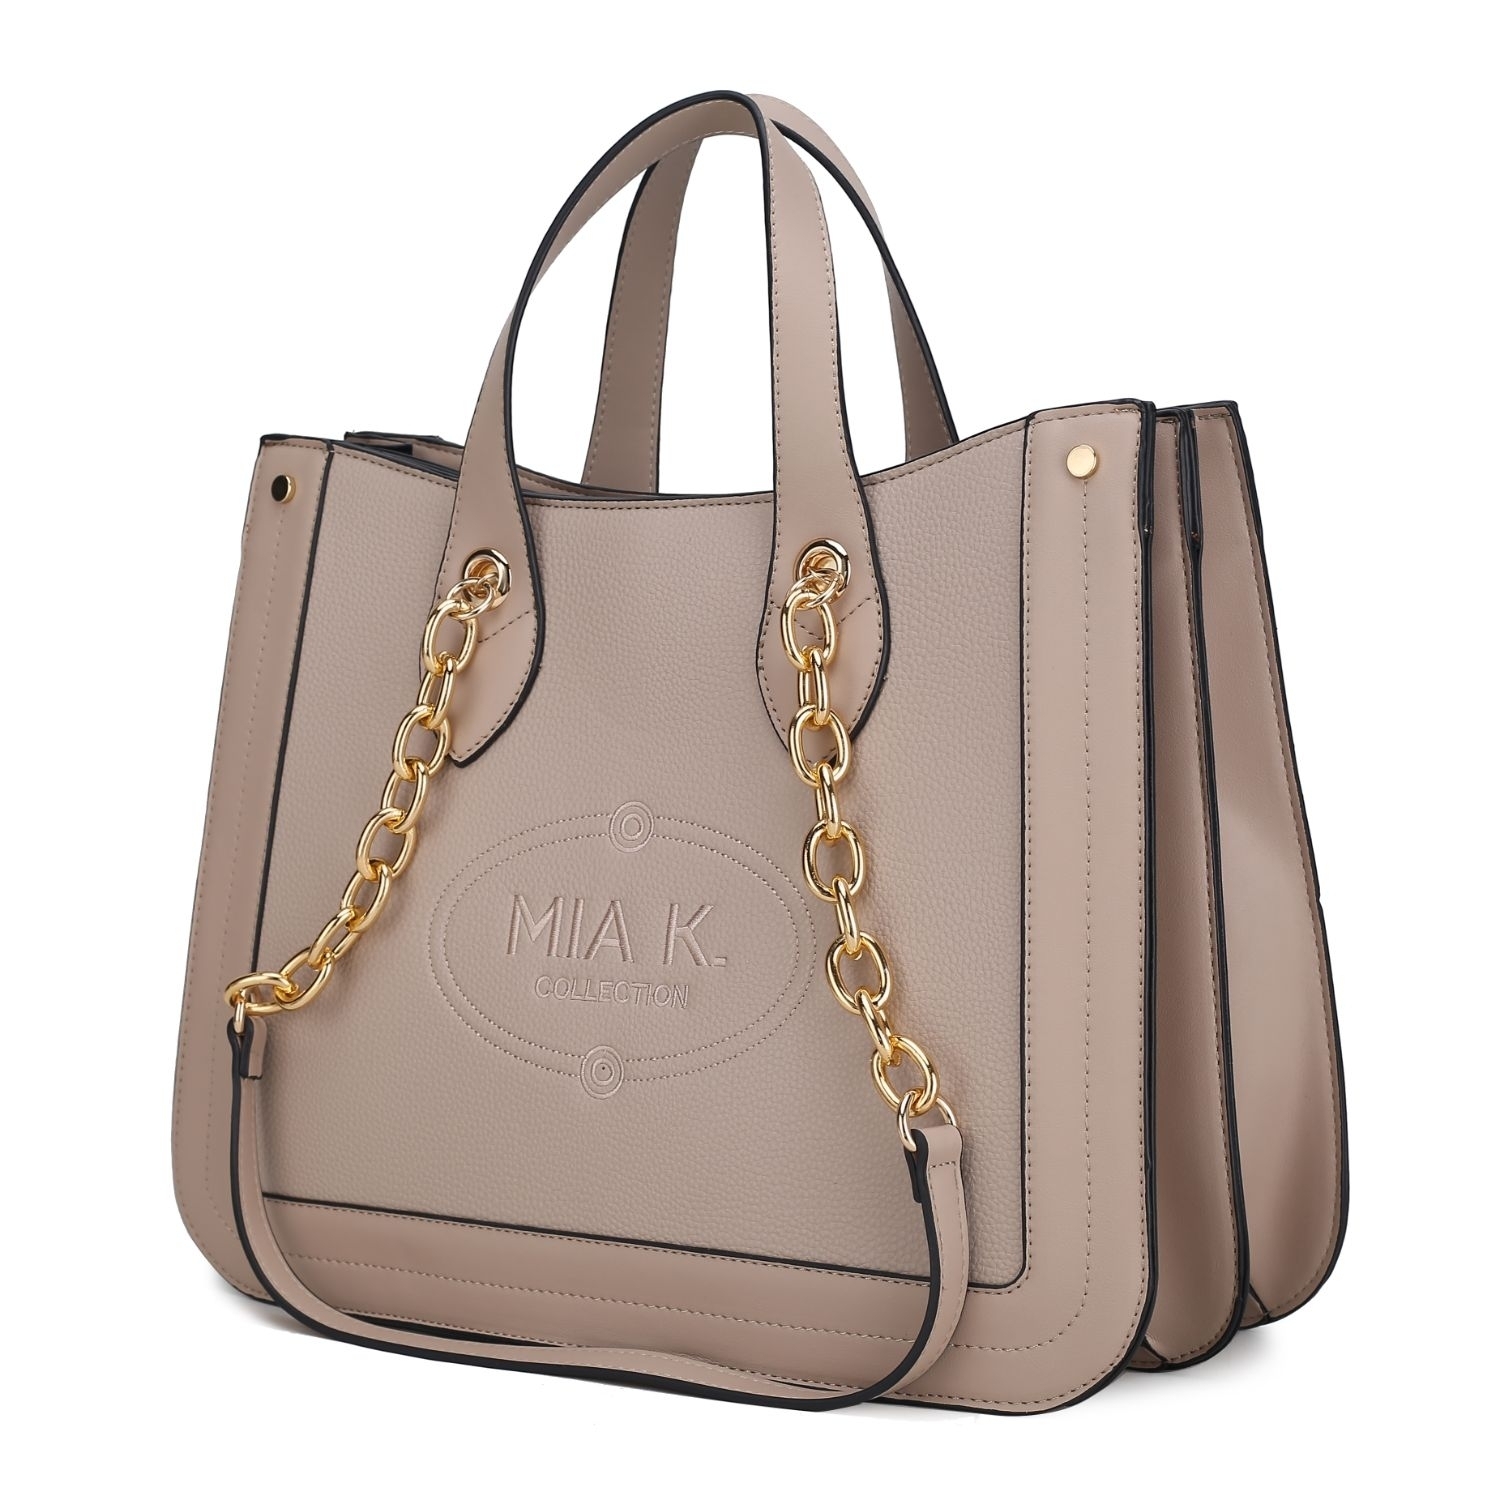 MKF Collection Stella Vegan Leather Women's Handbag Double Compartment Oversize Classy Tote By Mia K. - Taupe